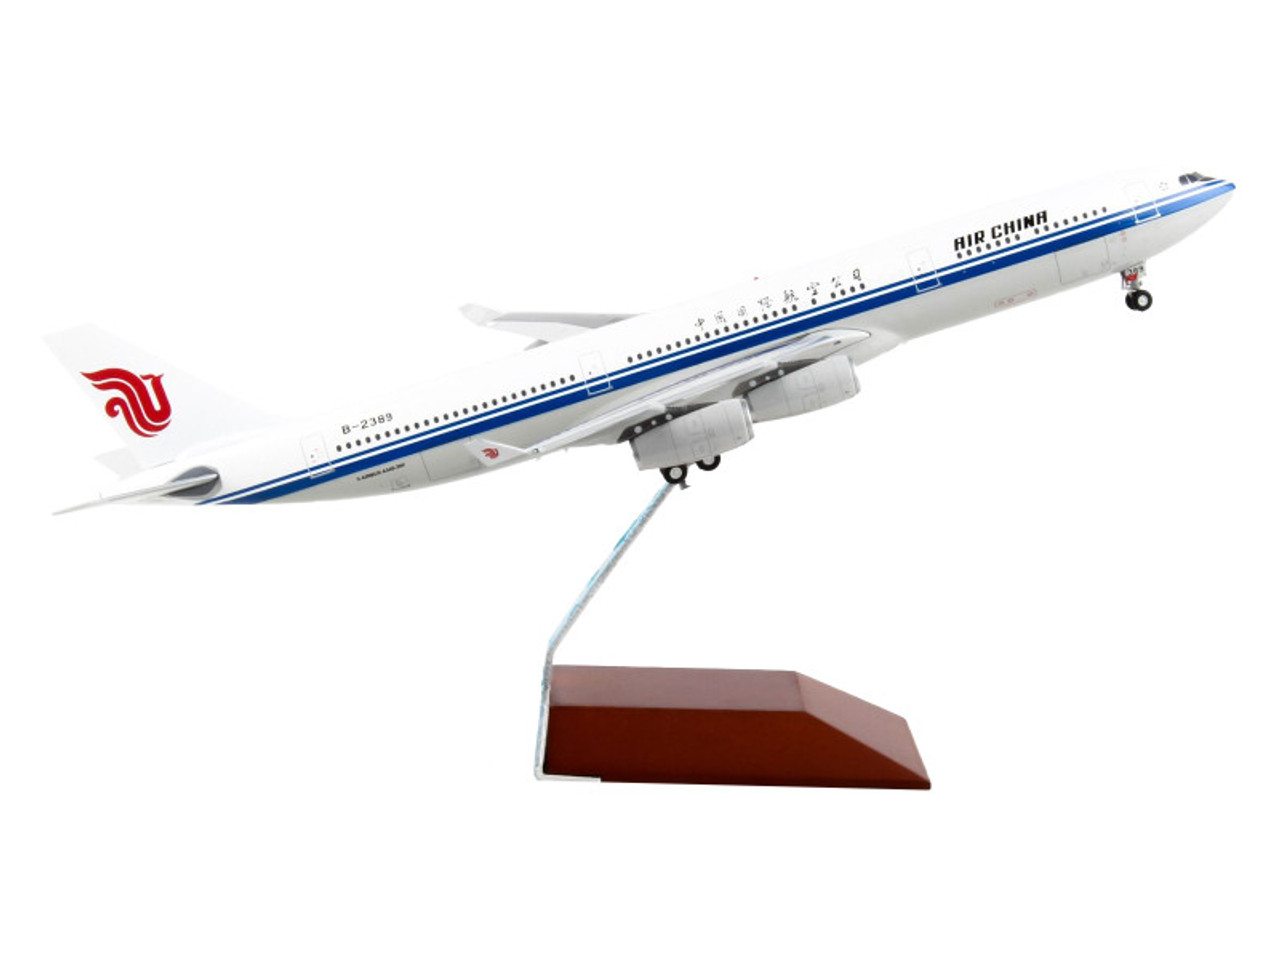 Airbus A340-300 Commercial Aircraft "Air China" White with Blue Stripes "Gemini 200" Series 1/200 Diecast Model Airplane by GeminiJets